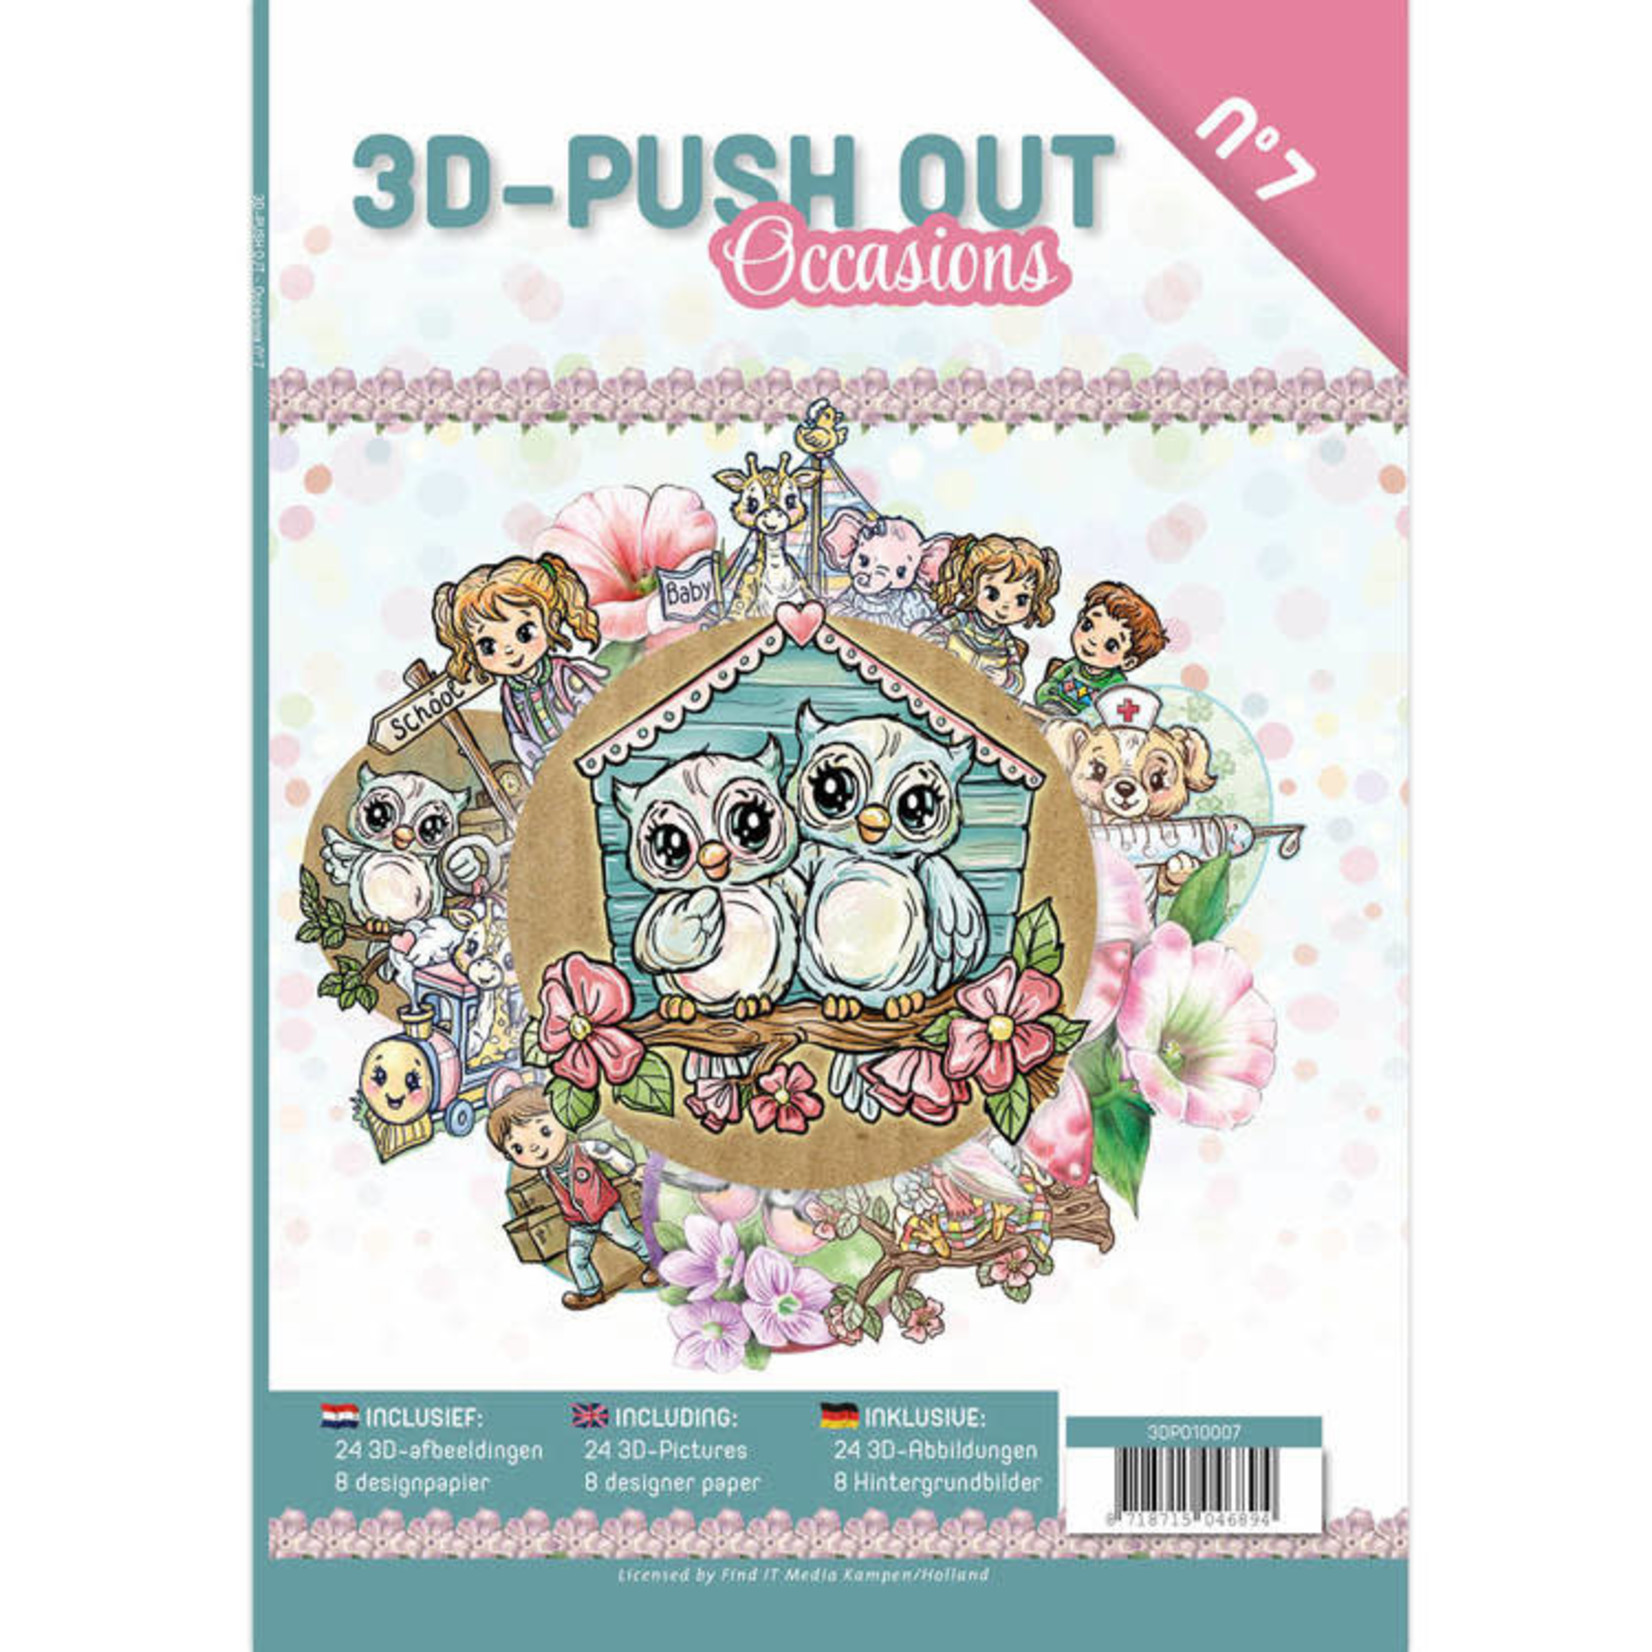 find it 3D Push Out Book - Occasions